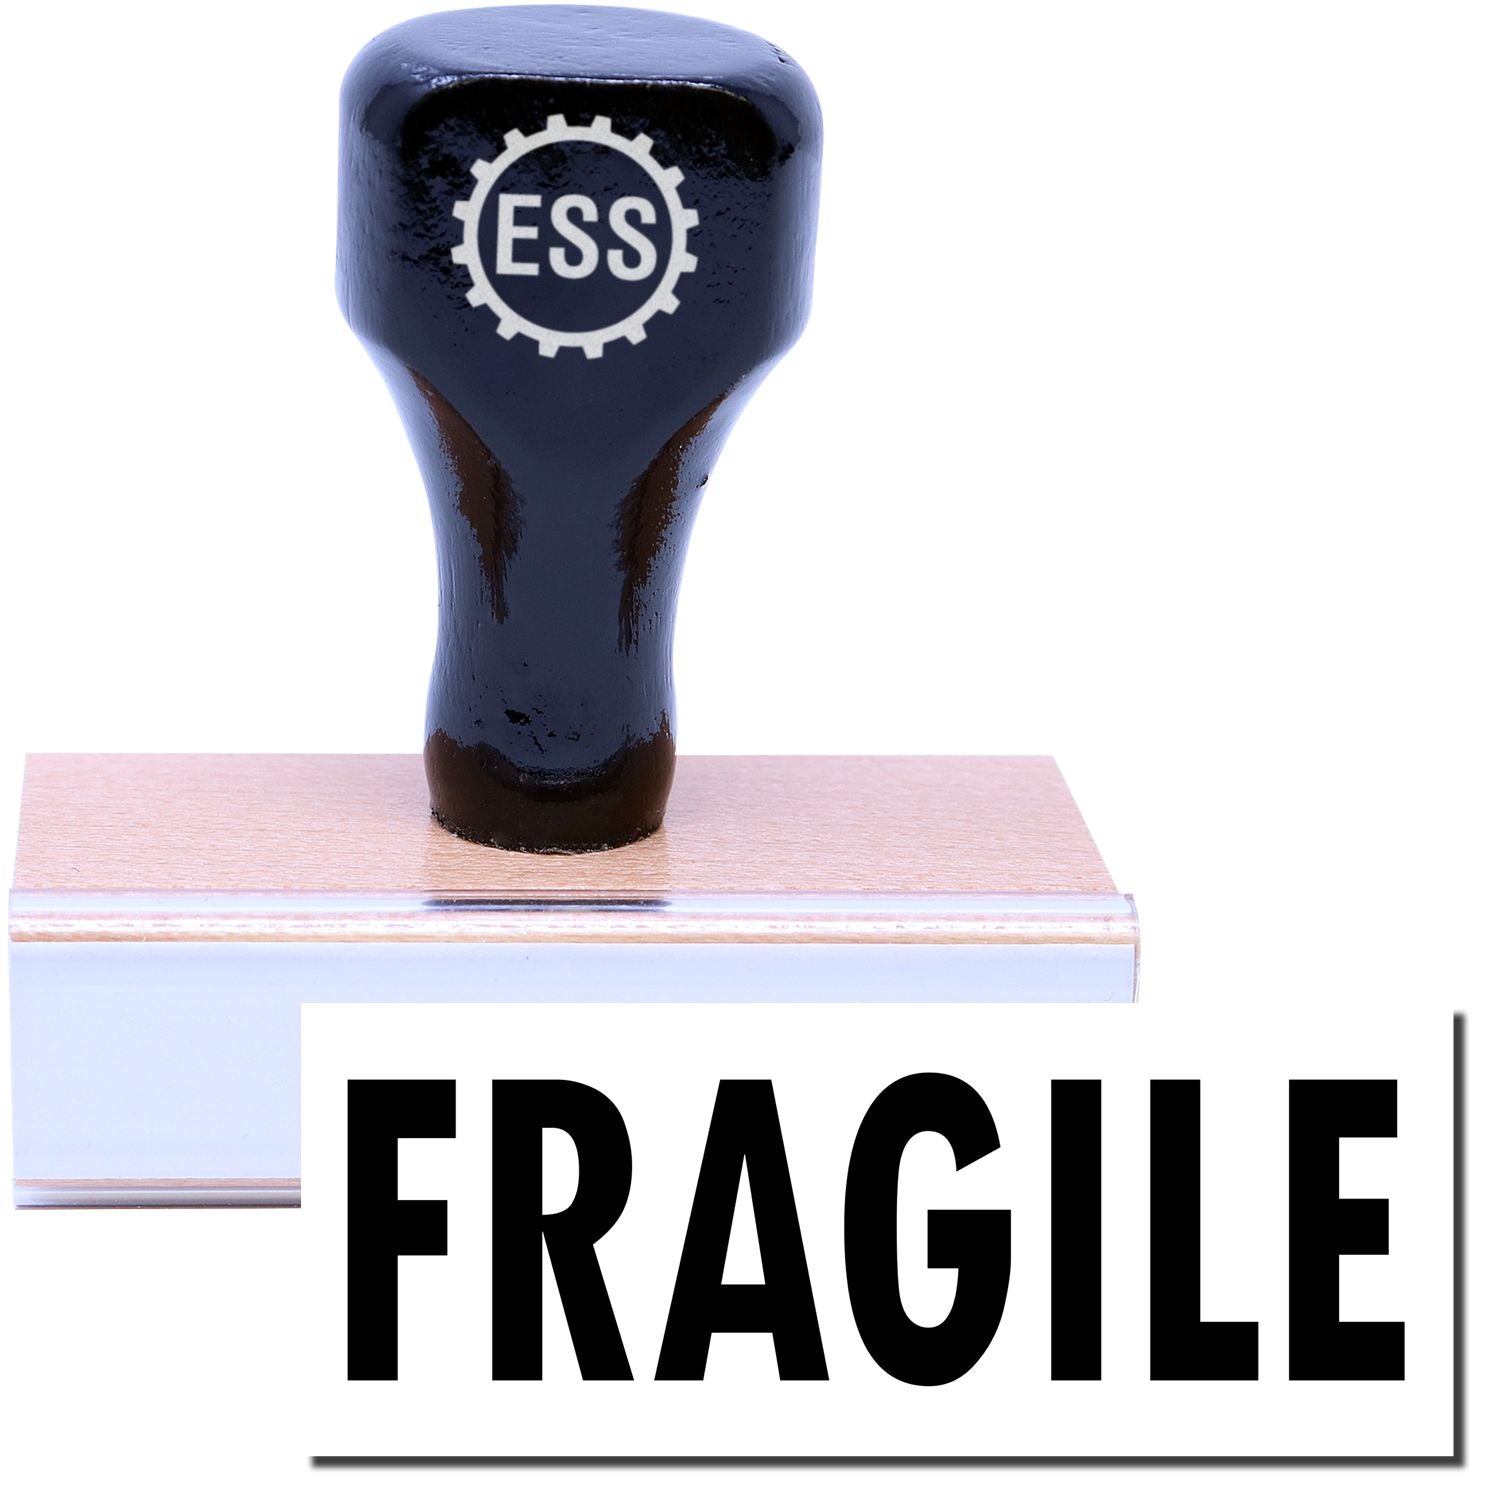 A stock office rubber stamp with a stamped image showing how the text "FRAGILE" is displayed after stamping.